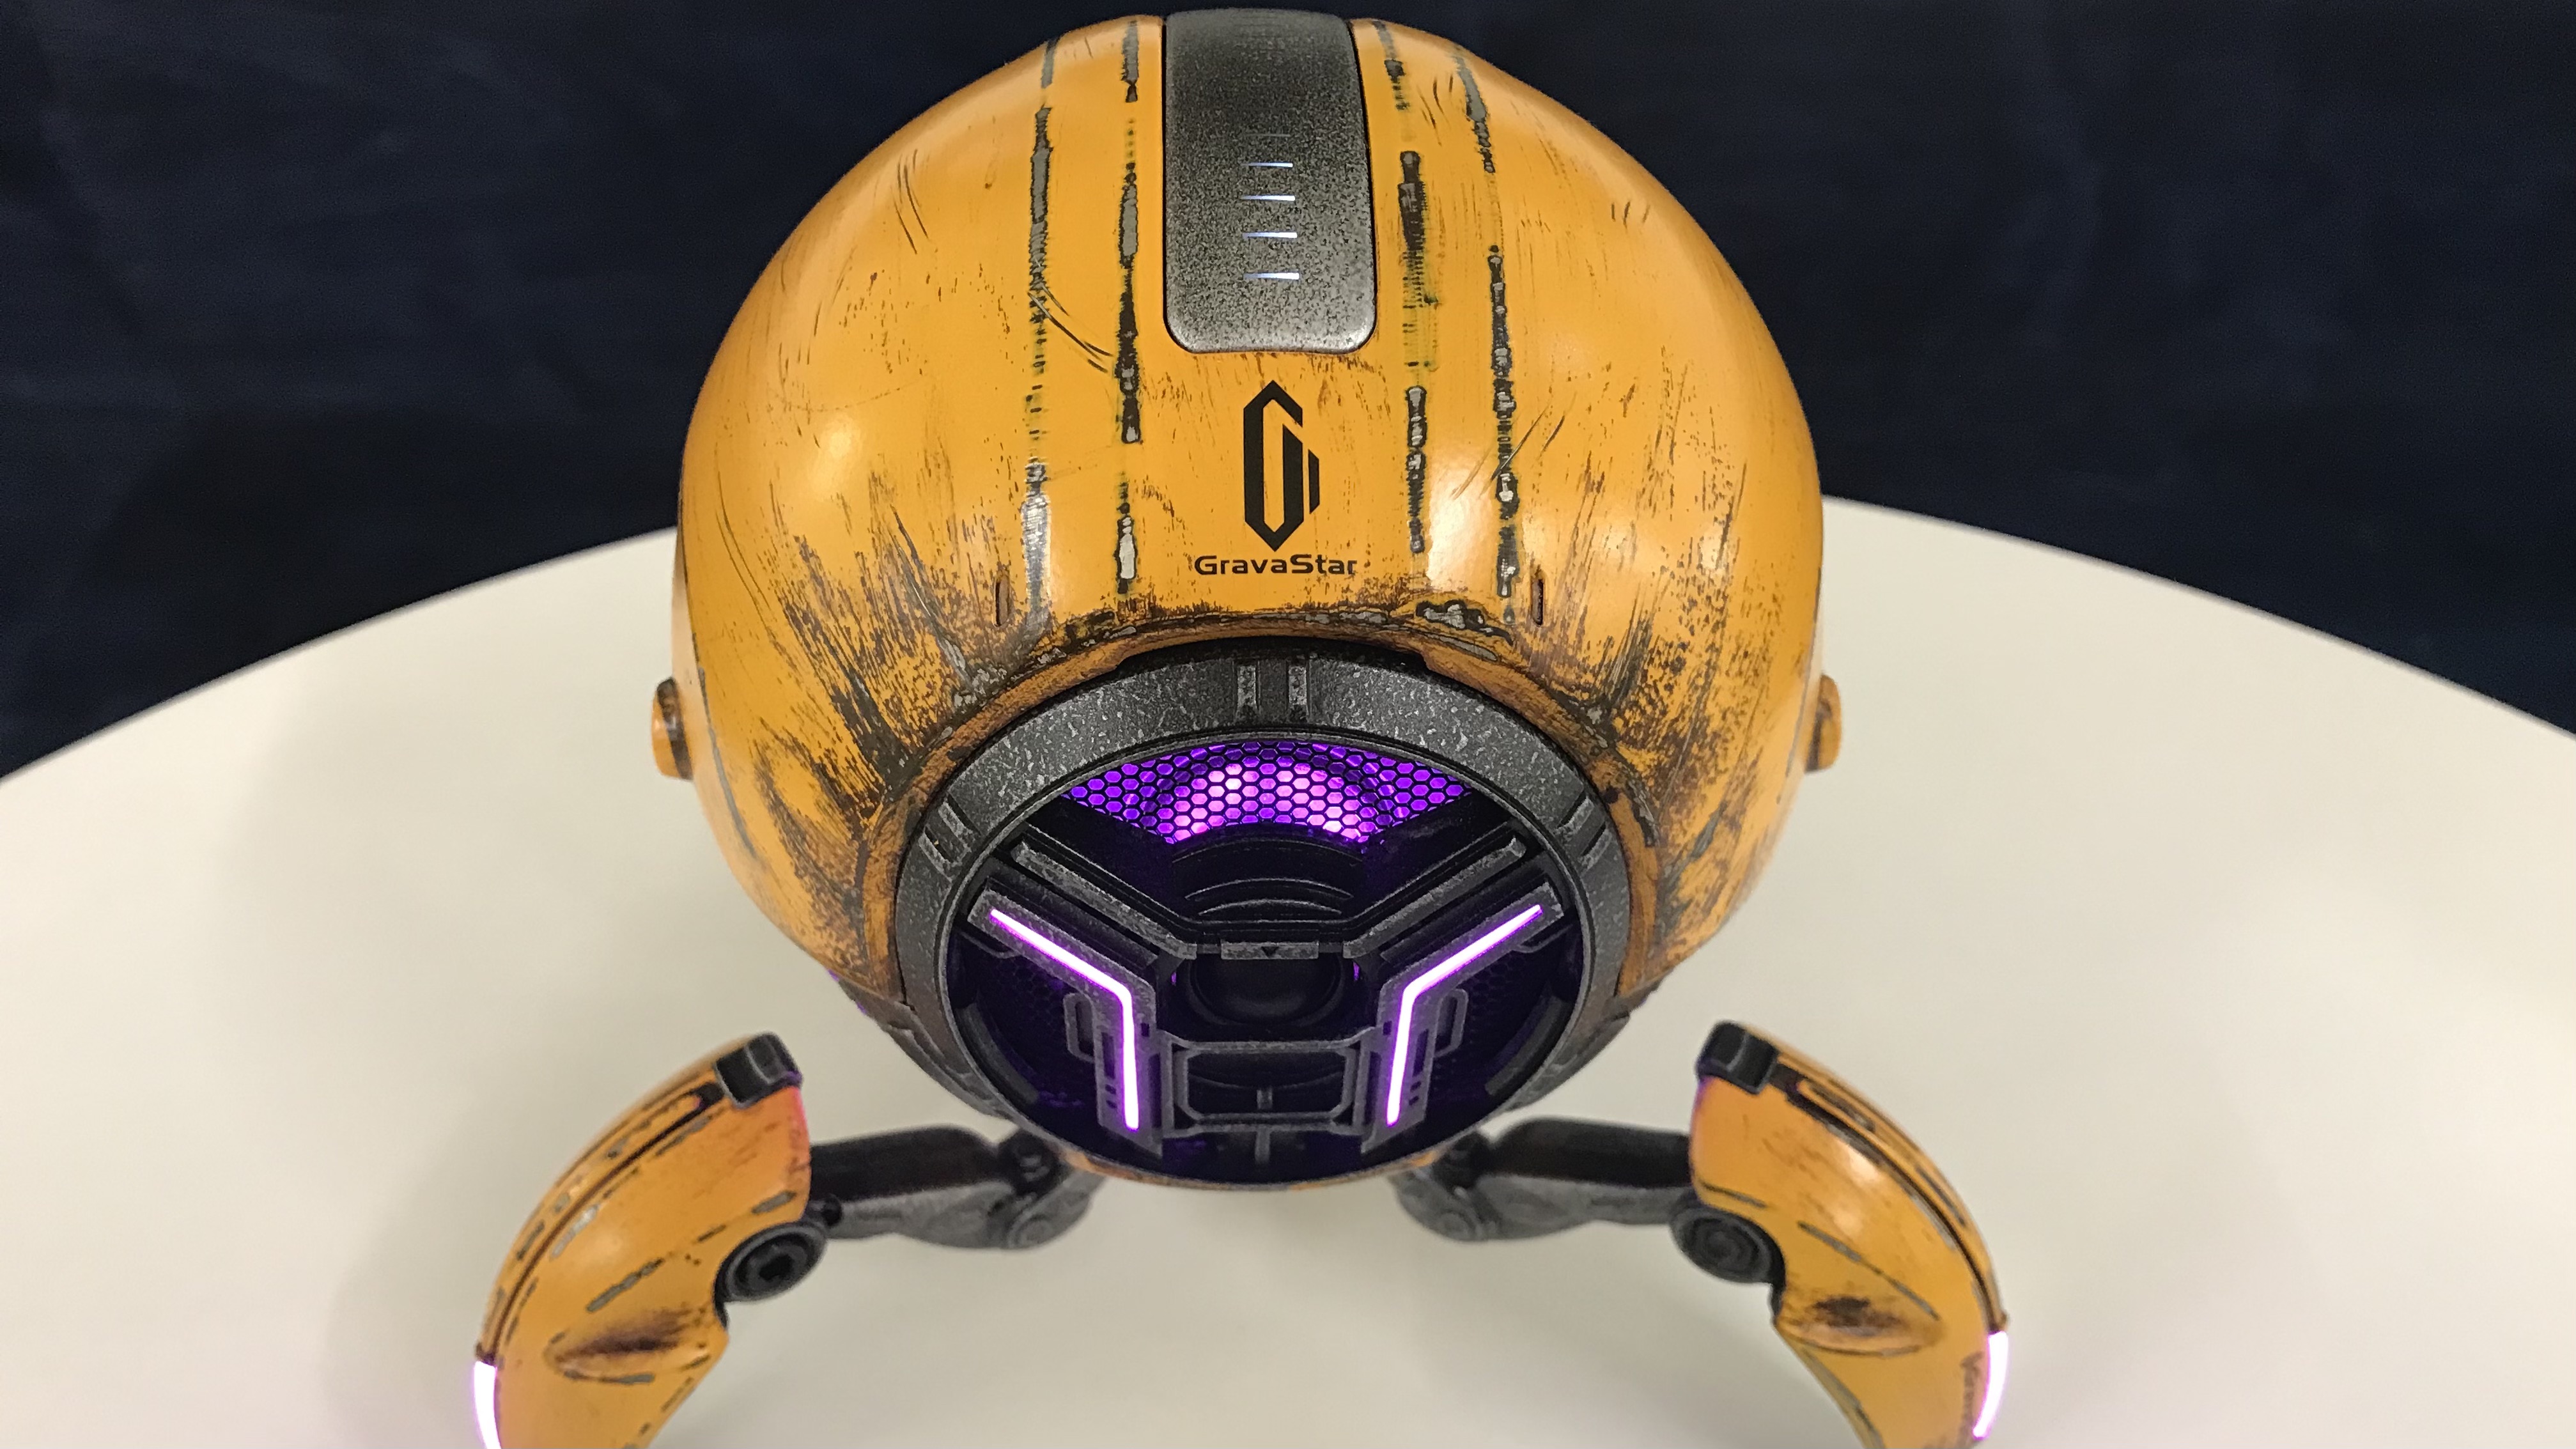 GravaStar Mars Pro in War Damaged Yellow on white table with lights glowing purple